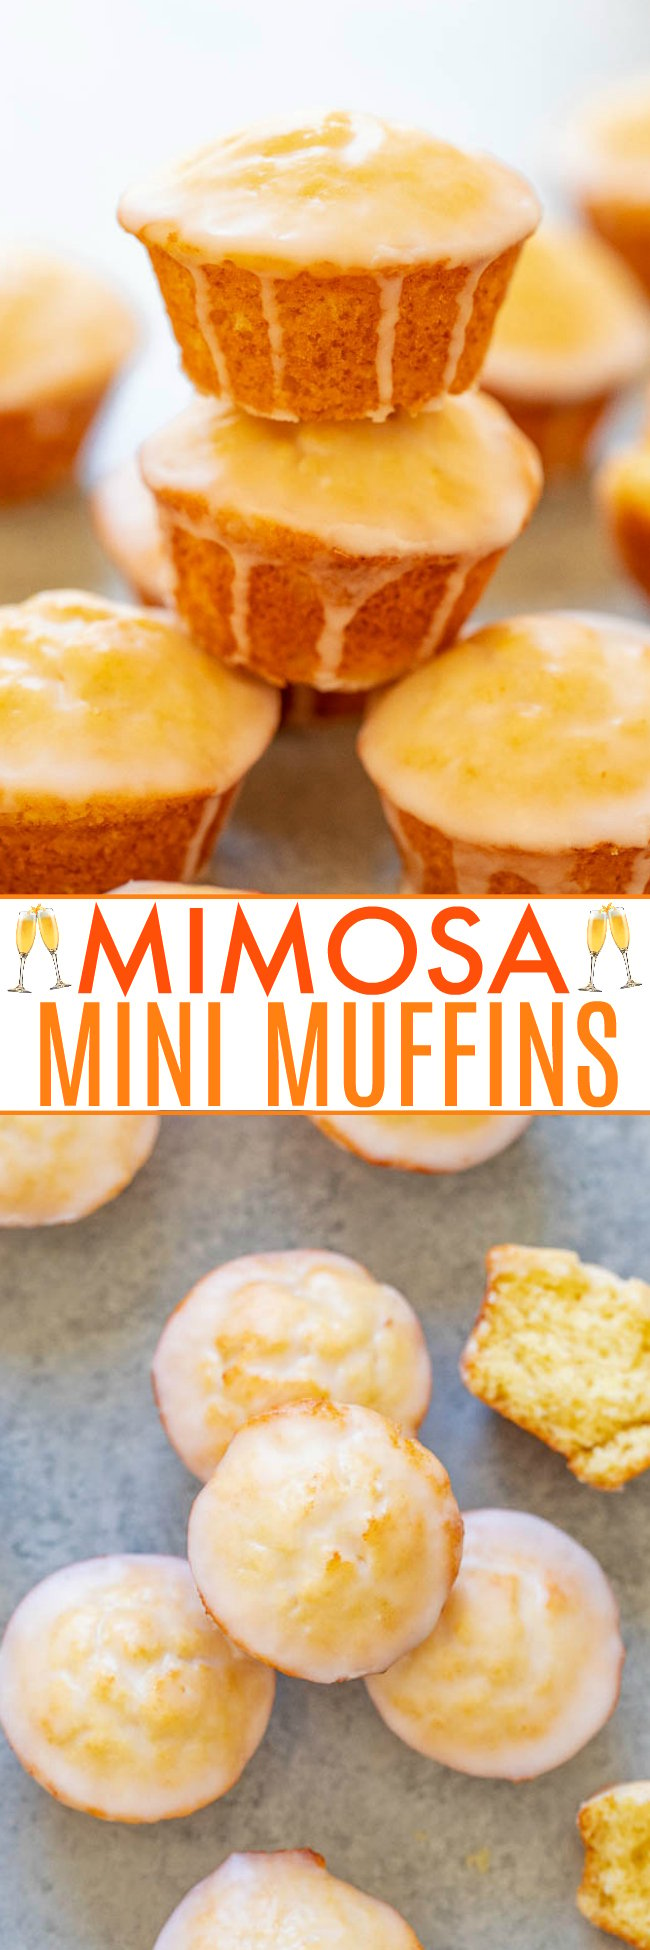 Mini Champagne Orange Muffins (aka Mimosa Muffins) — Why settle for just drinking a mimosa when you can indulge in adorable mini muffins made with CHAMPAGNE and ORANGE JUICE!! The perfect two-bite mimosa! FAST, EASY, and perfect for brunch or get-togethers!!